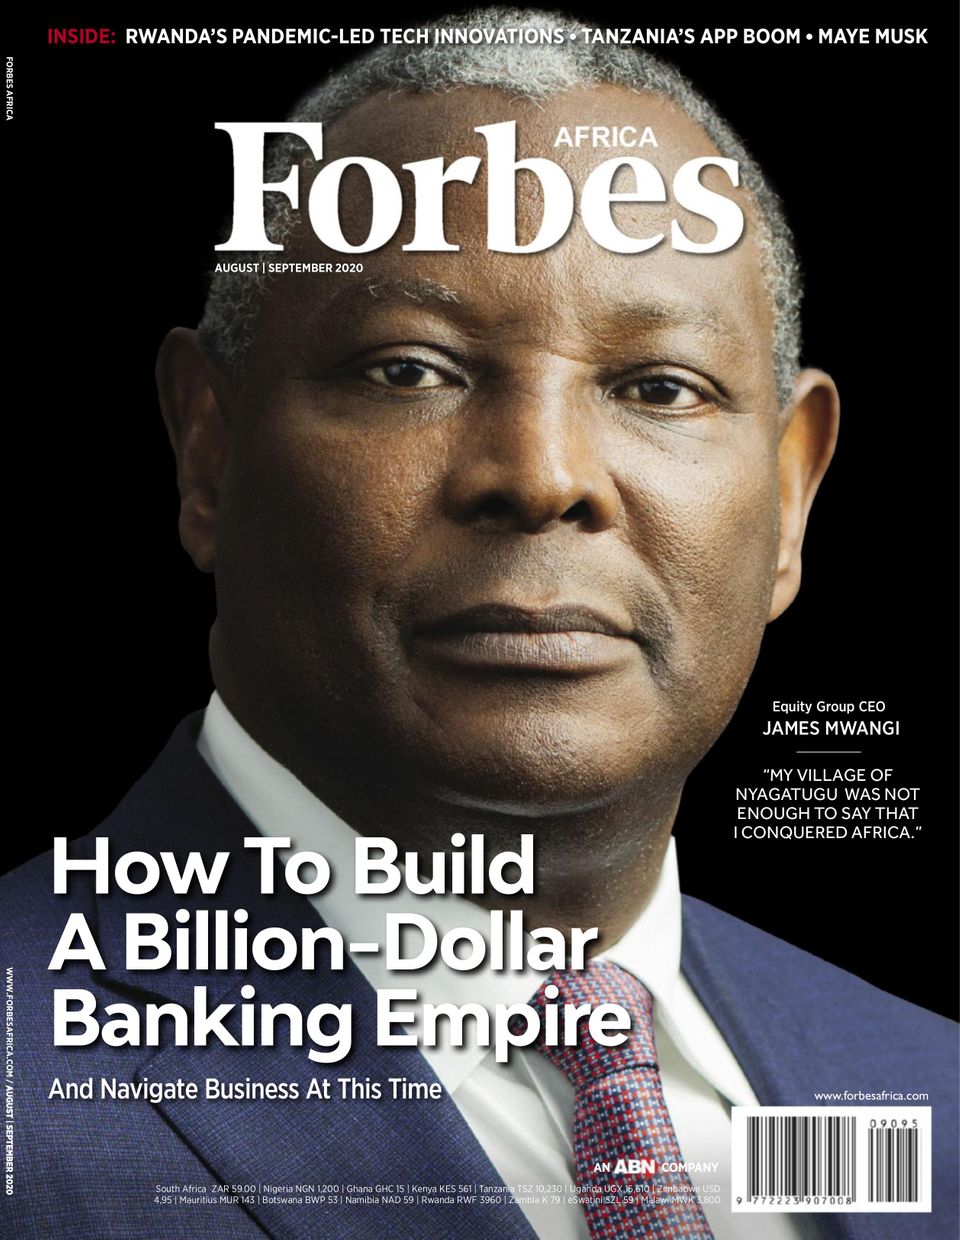 forbes magazine cover august 2022